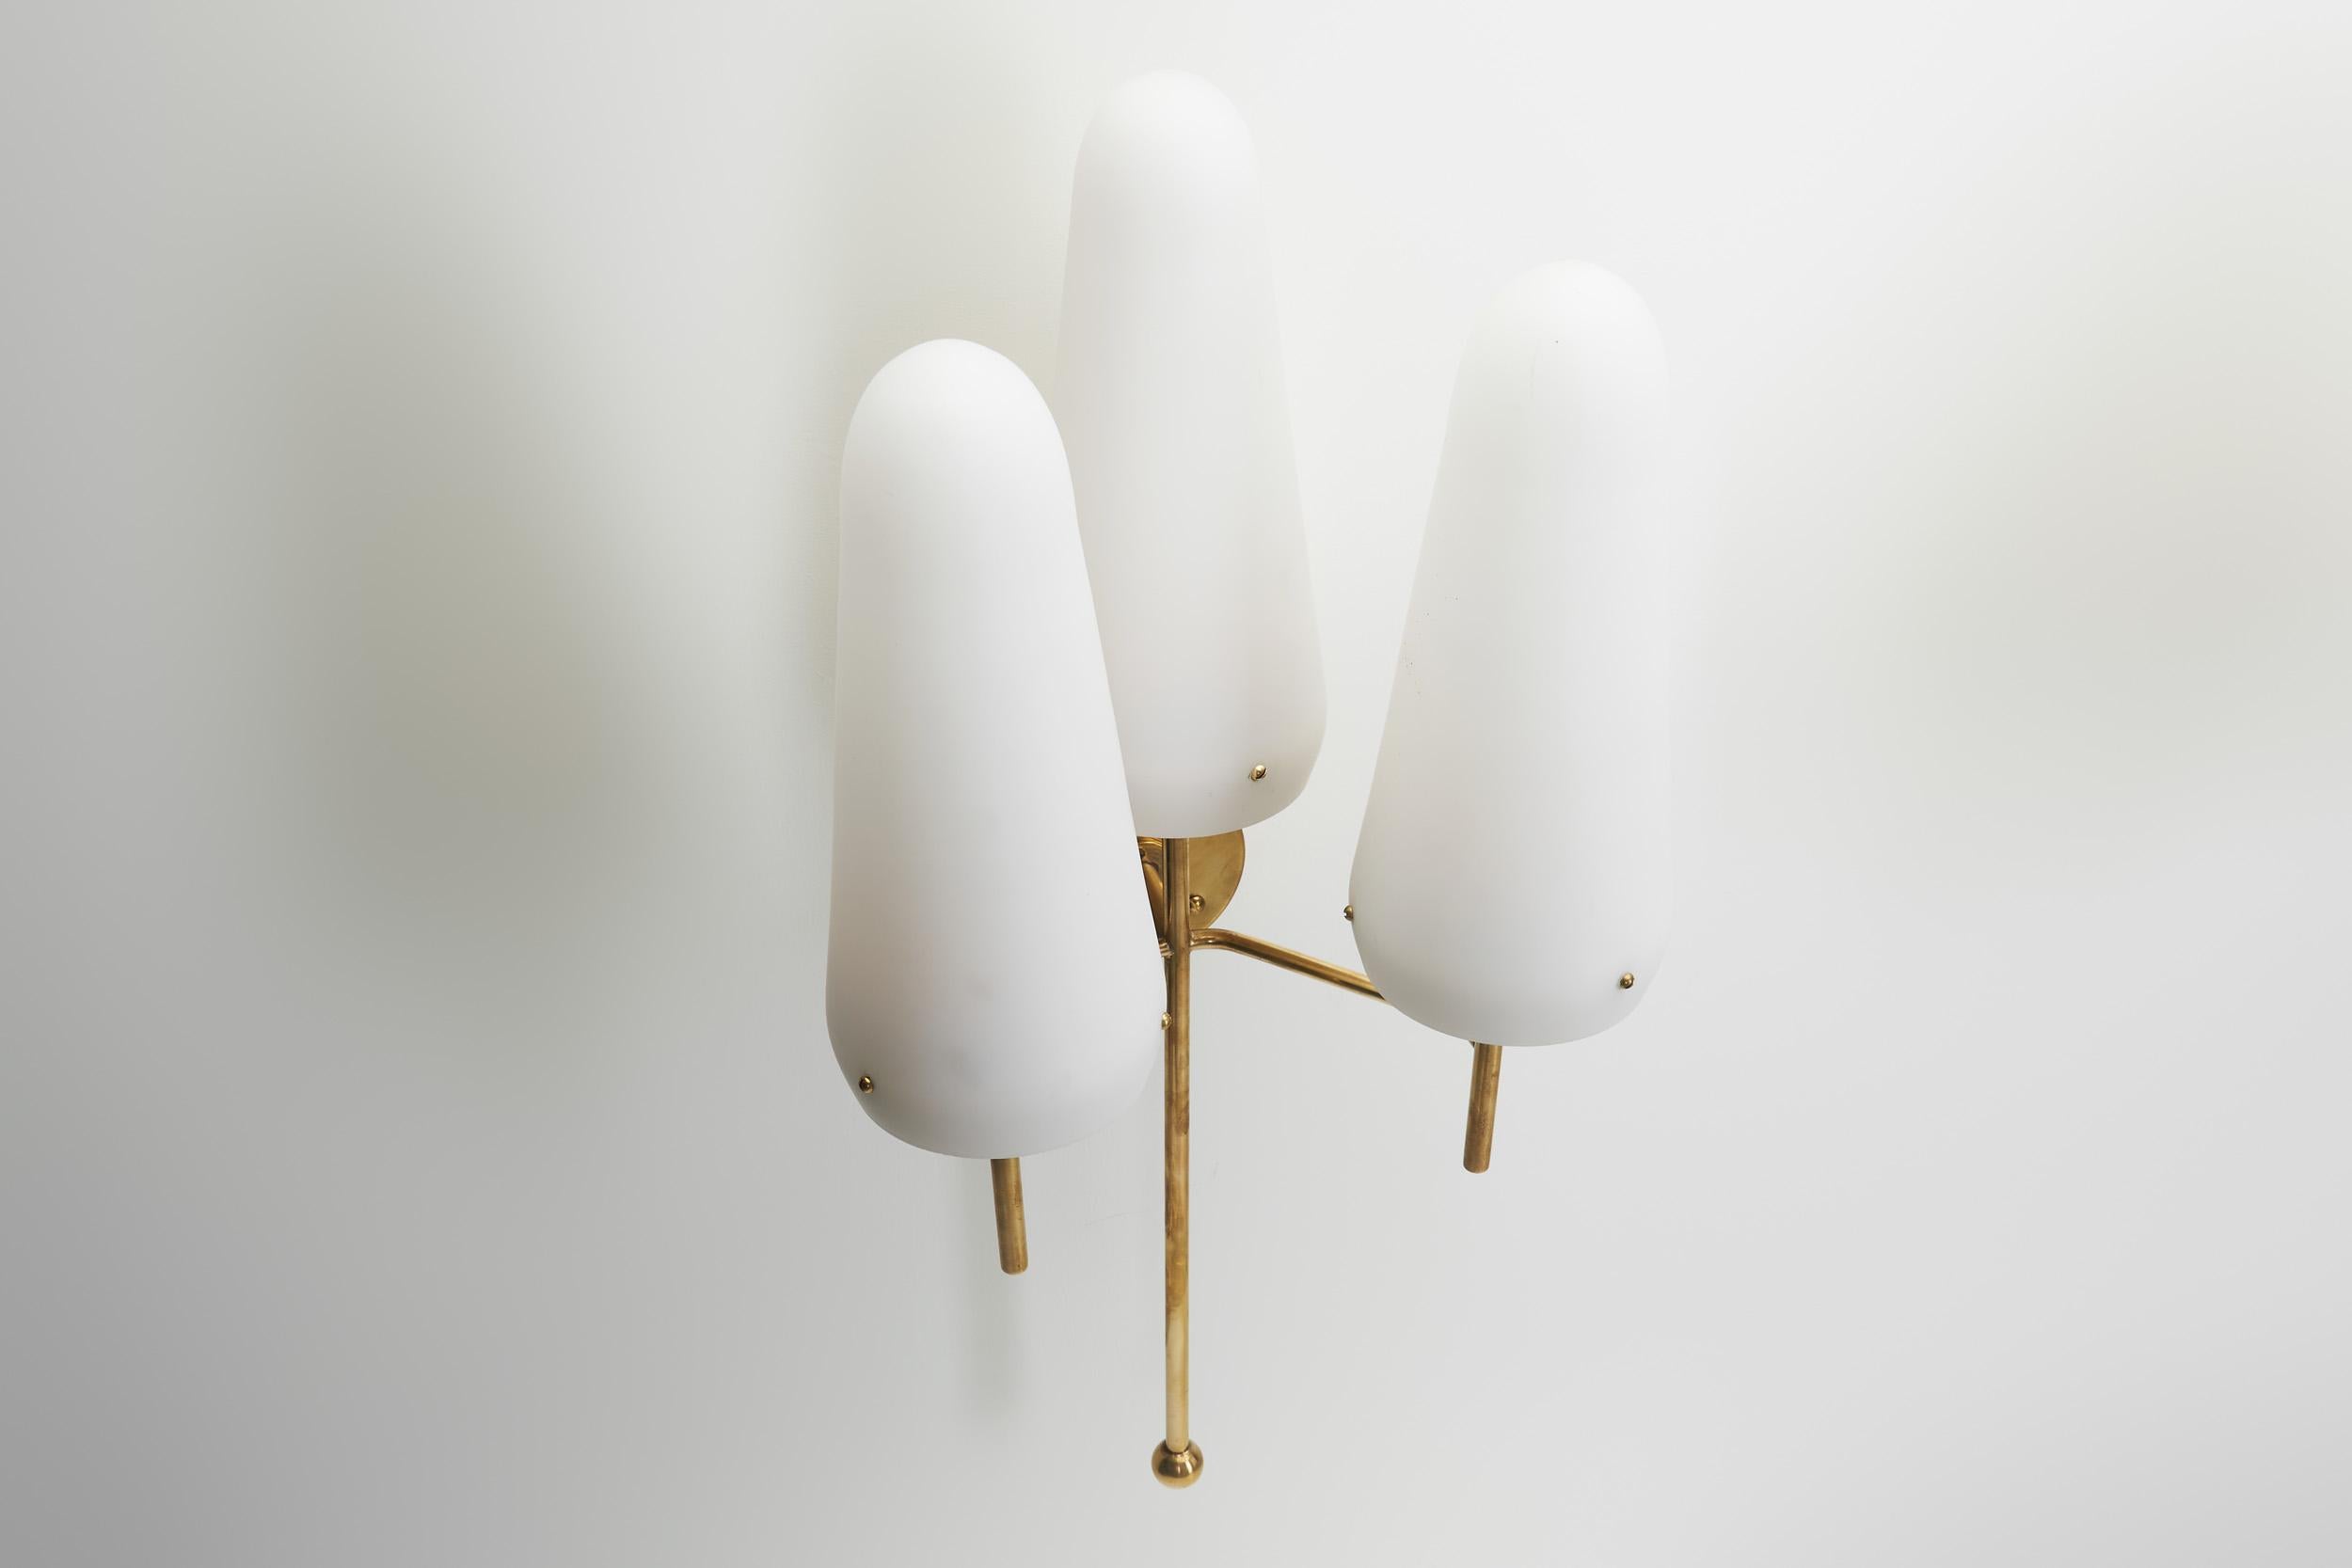 Hans Agne Jakobsson Brass and Glass Wall Sconces for AB Markaryd, Sweden 1950s For Sale 4